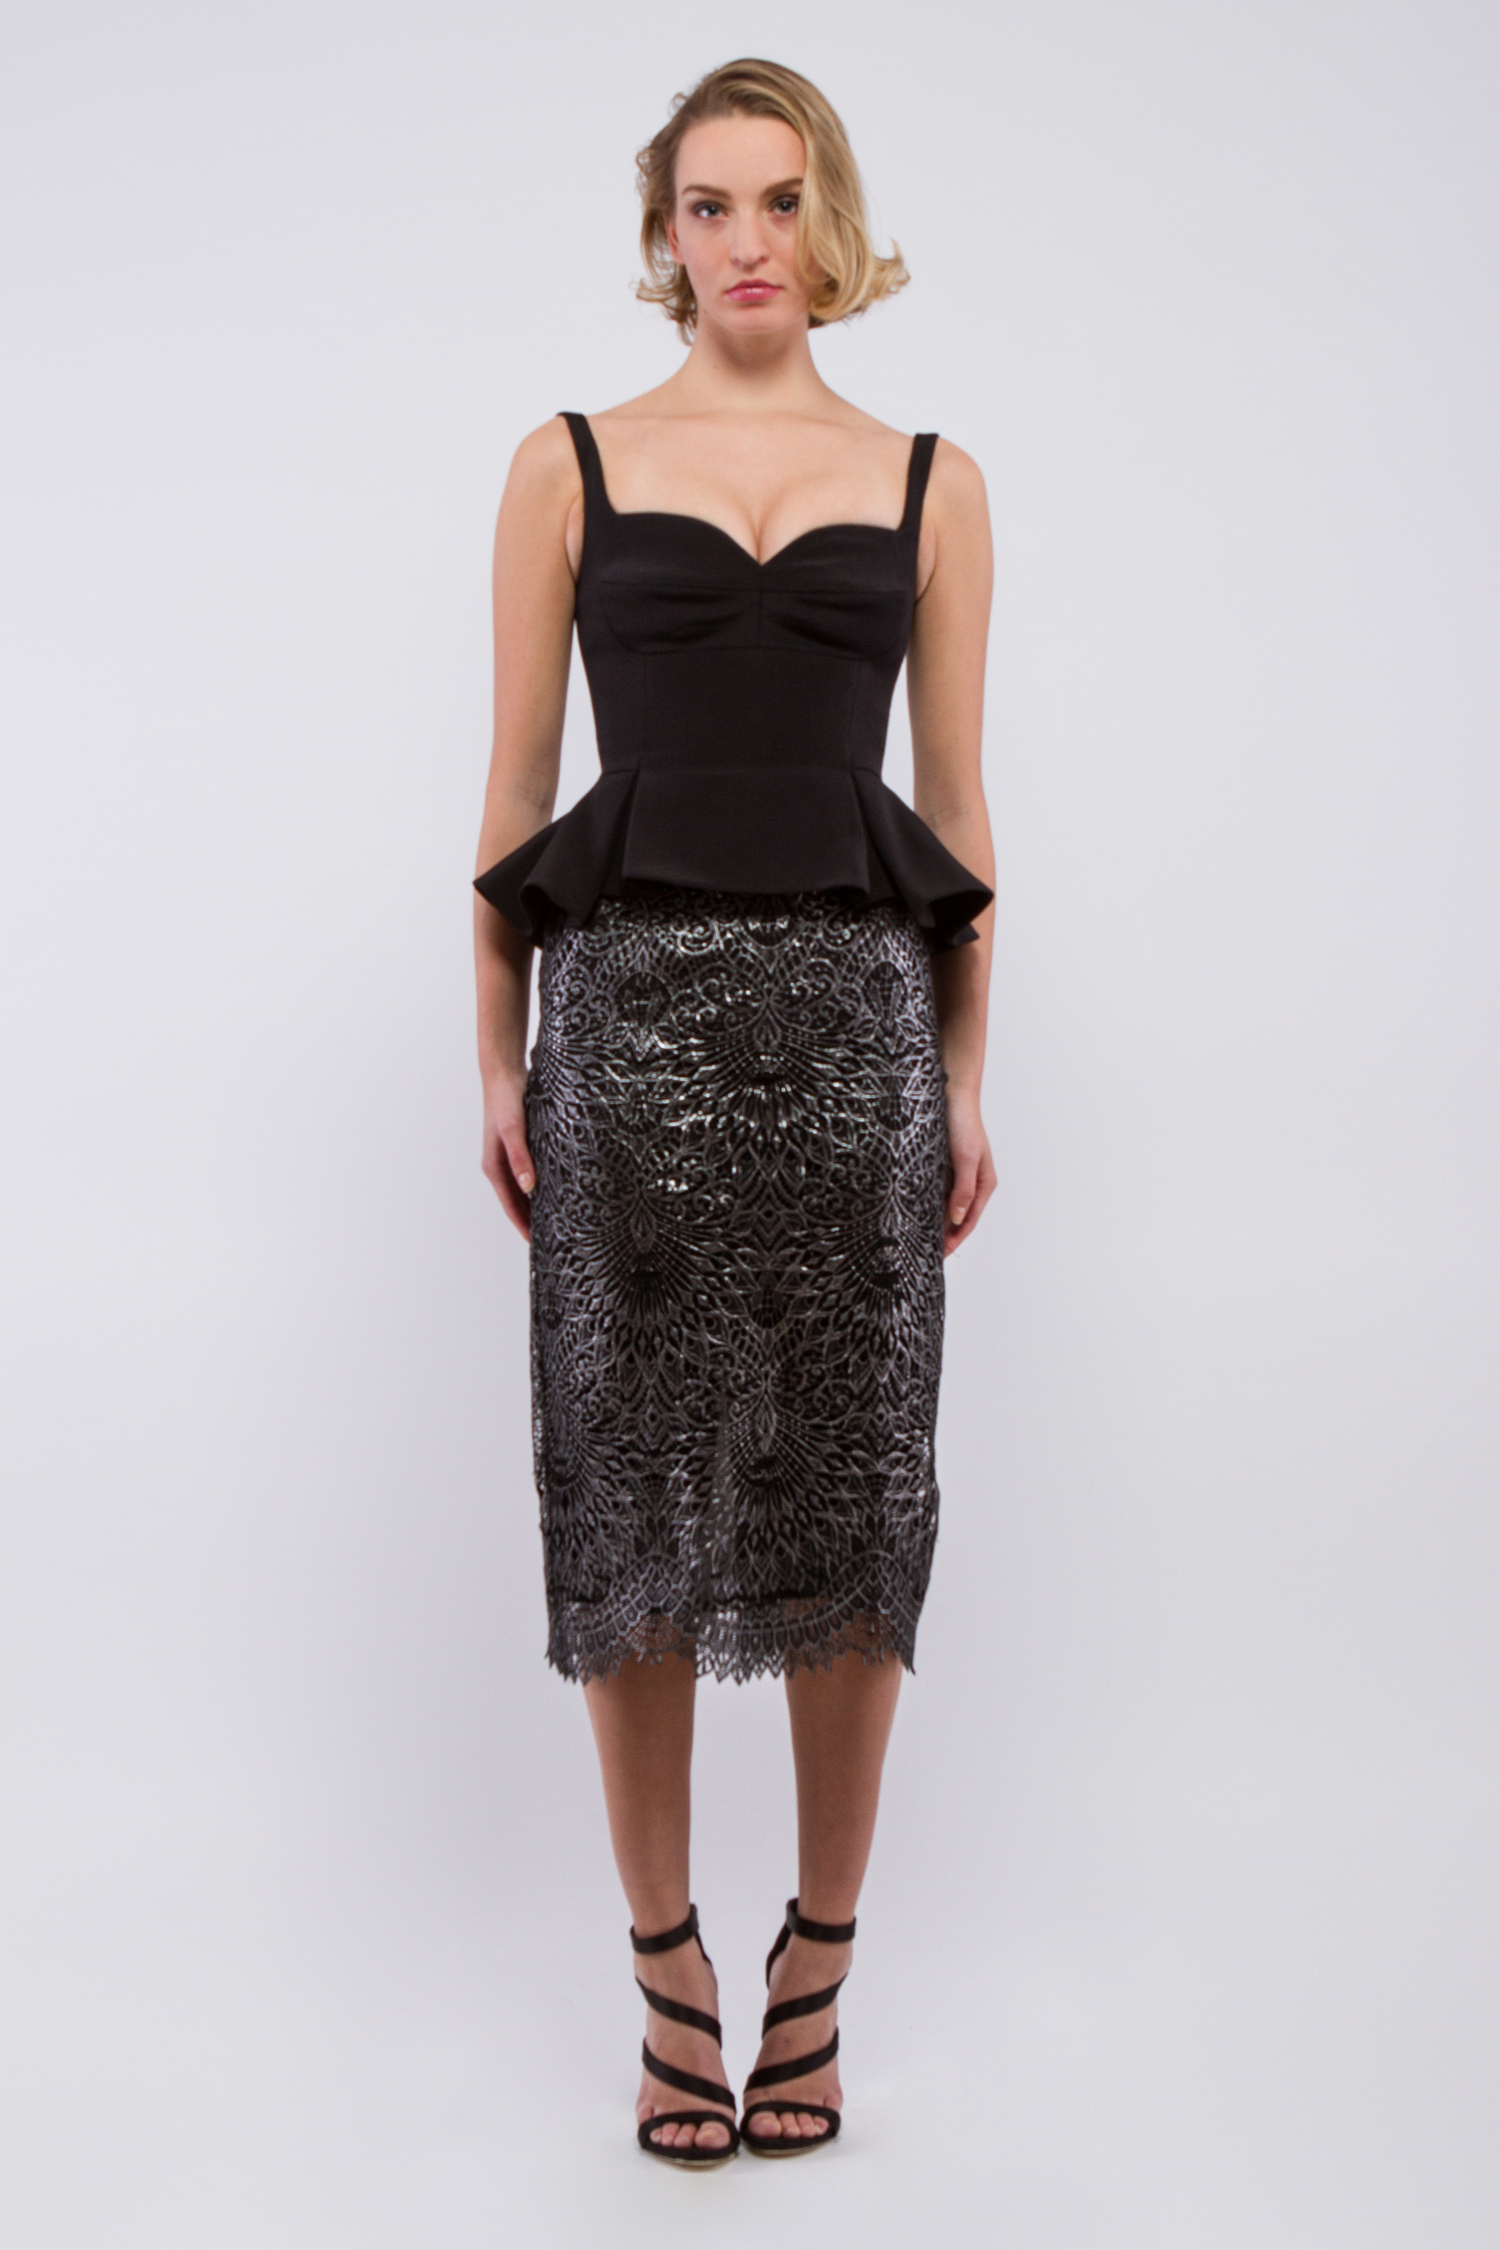 4 ply silk crepe bustier with peplum, Metallic lace pencil skirt - Look 7 - The Dream